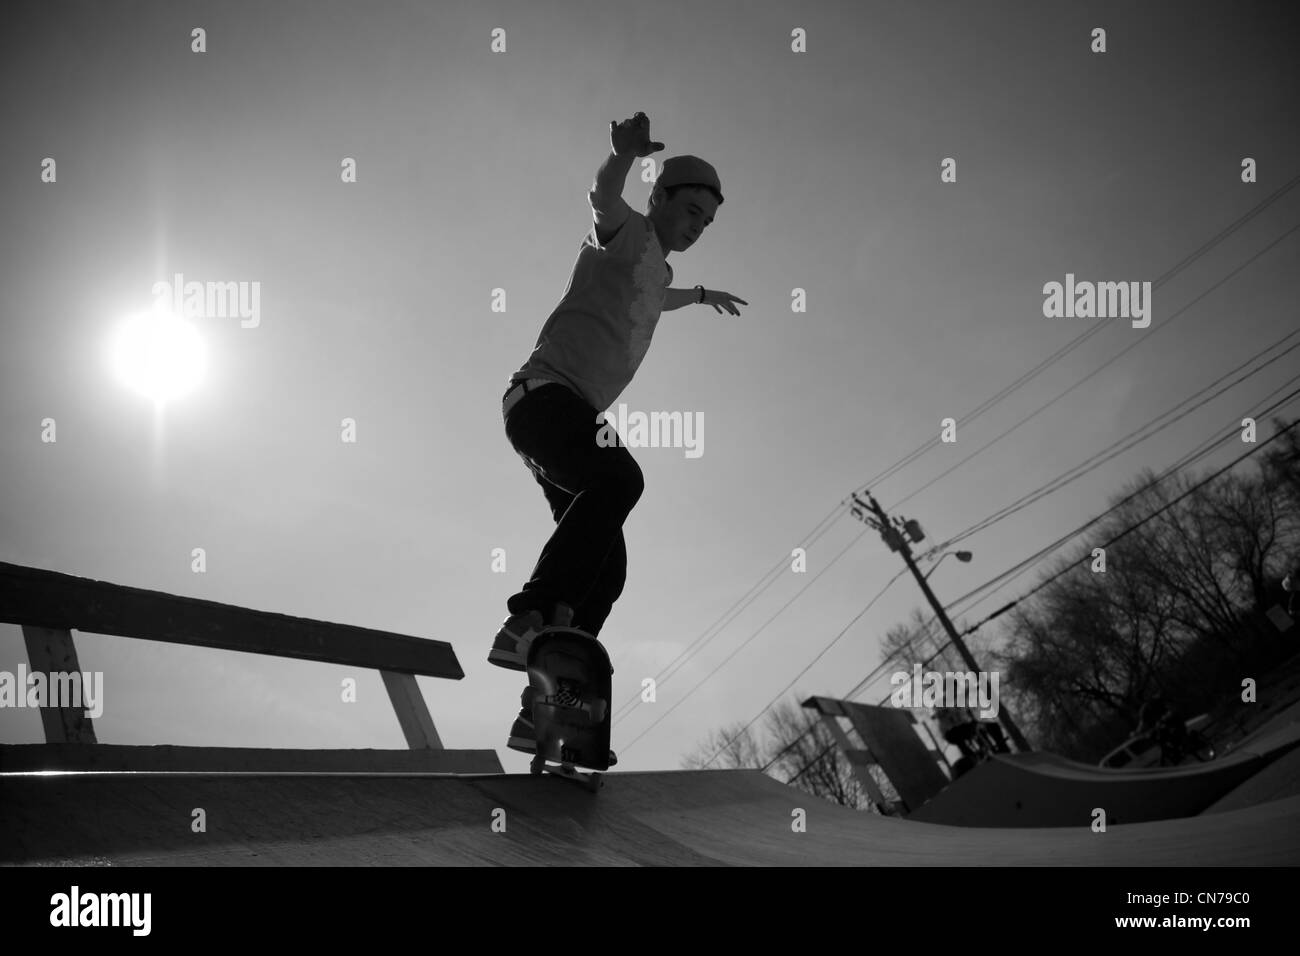 Portrait of a young skateboarder skating on a ramp at the skate park. Stock Photo